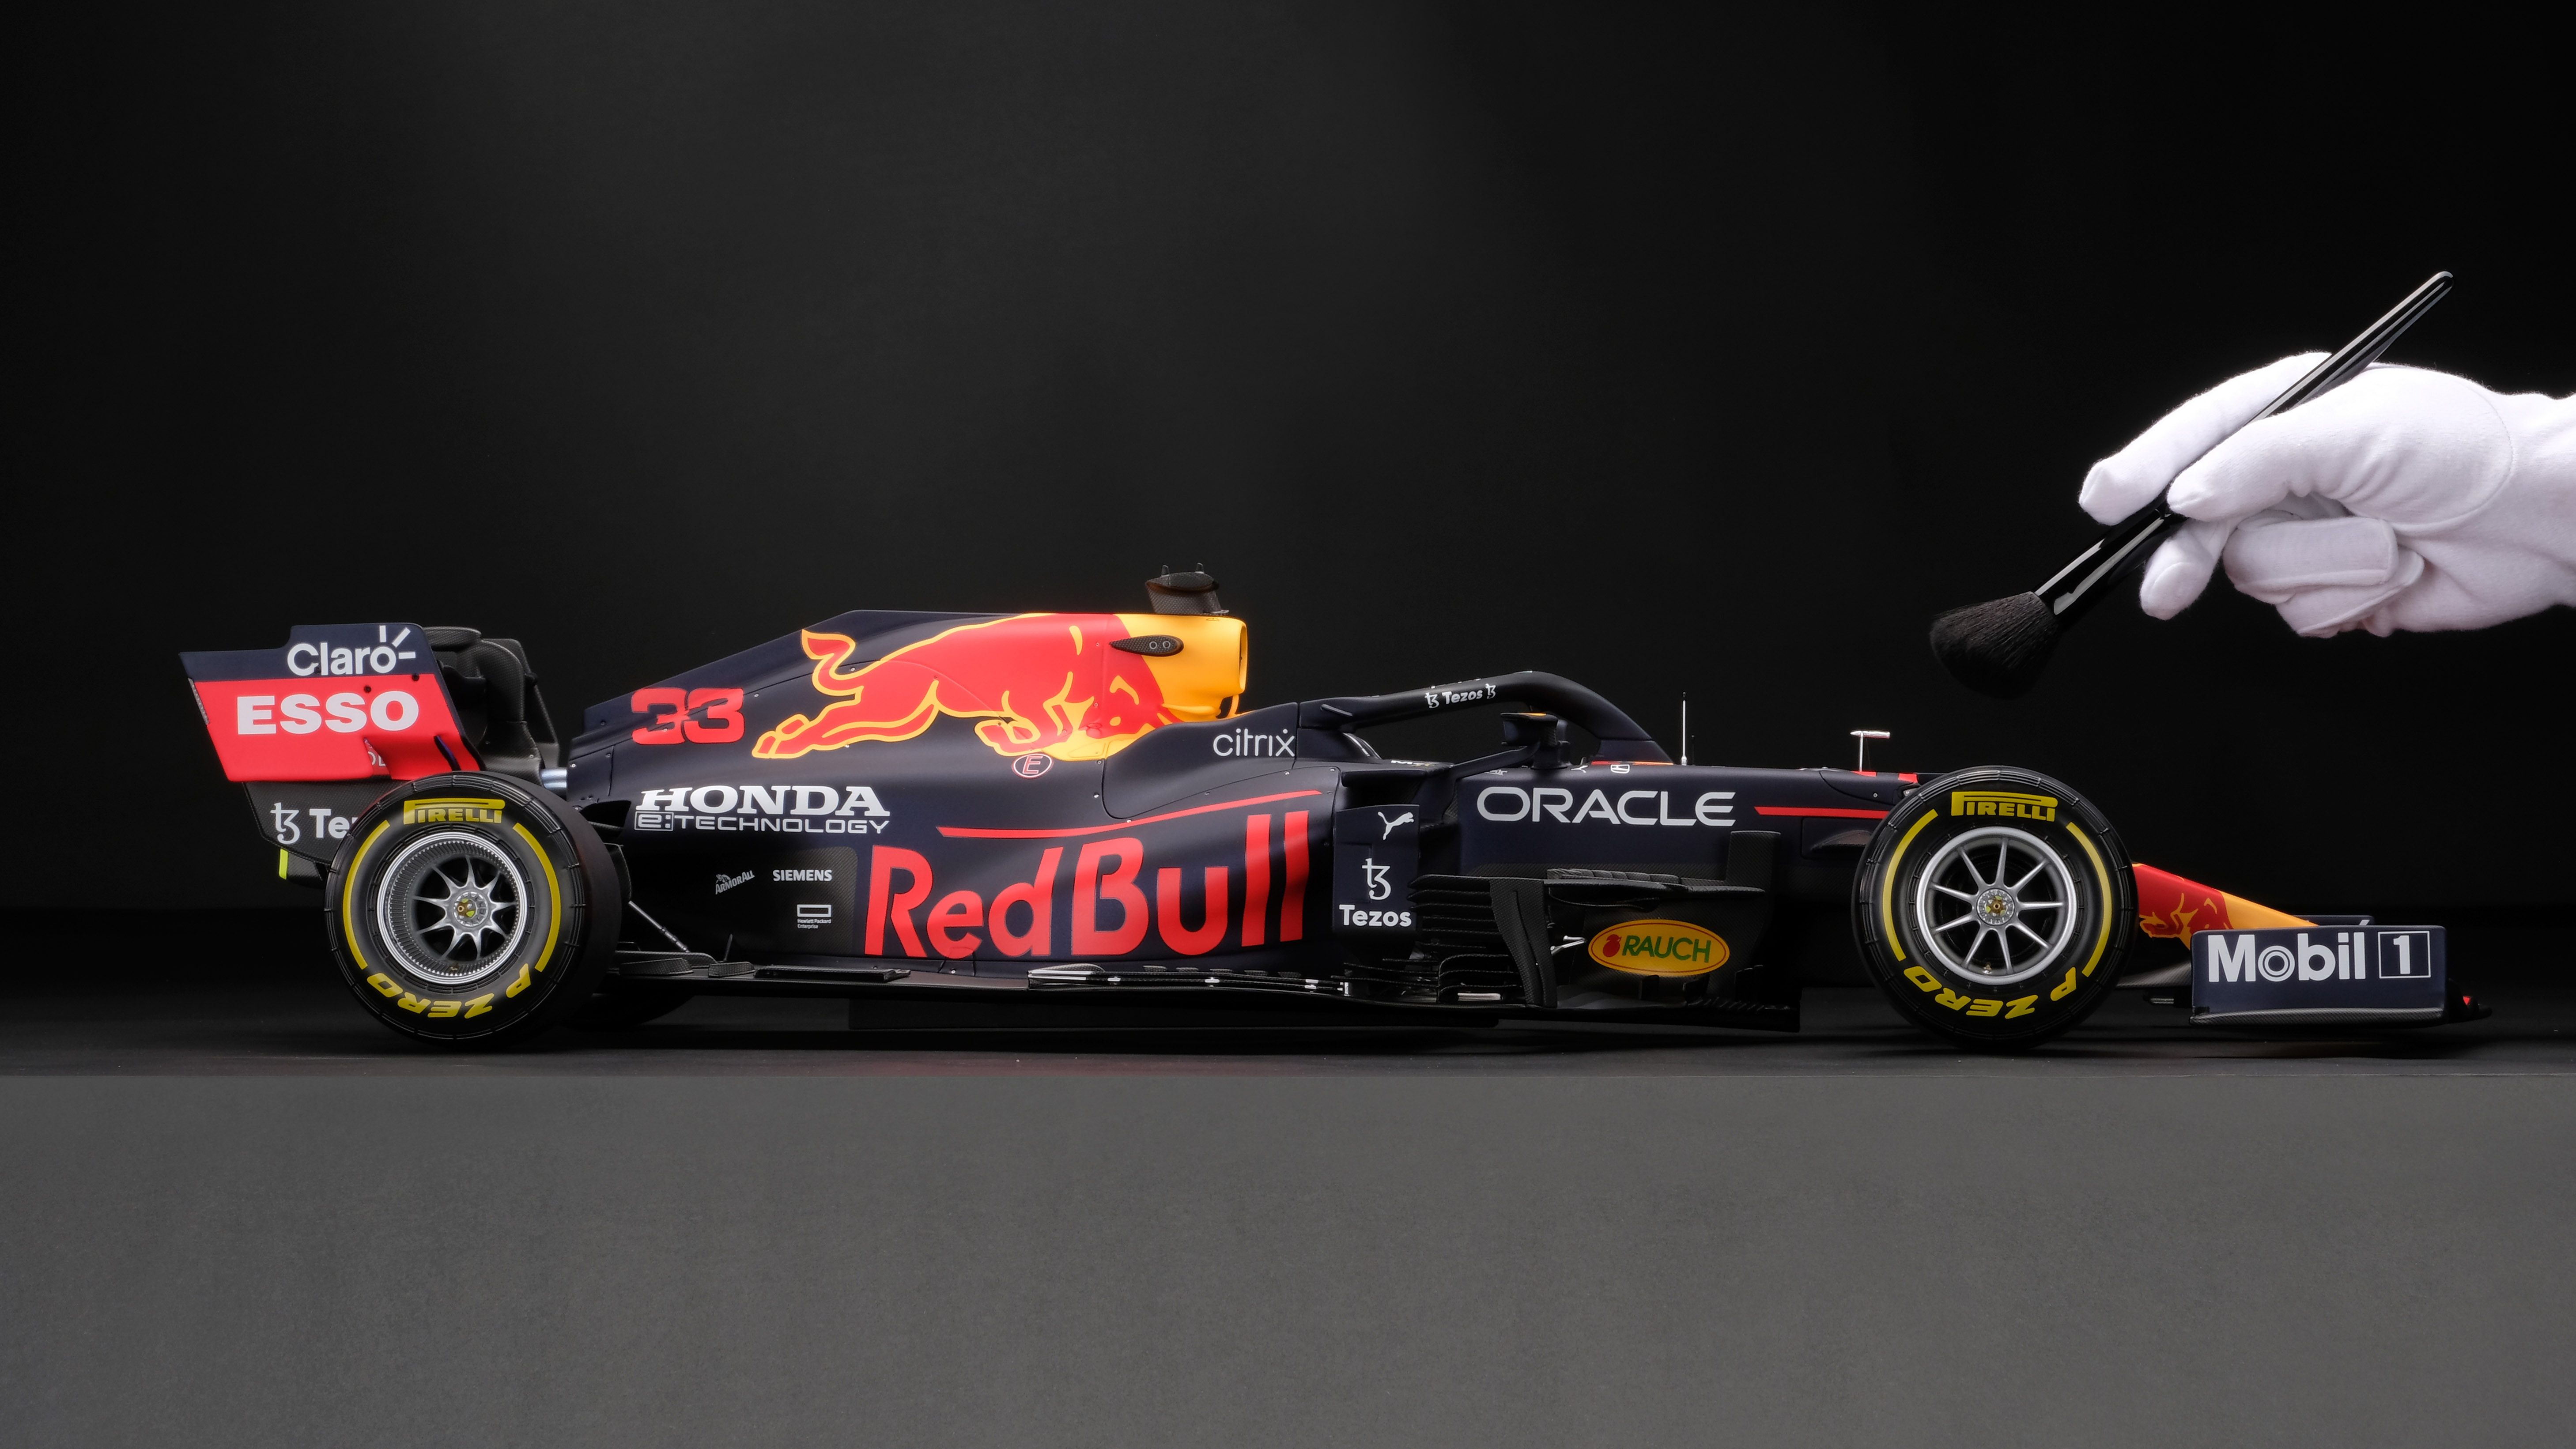 You Can Now Buy A £7k Scale Model Of Max Verstappen's Championship Winning F1 Car